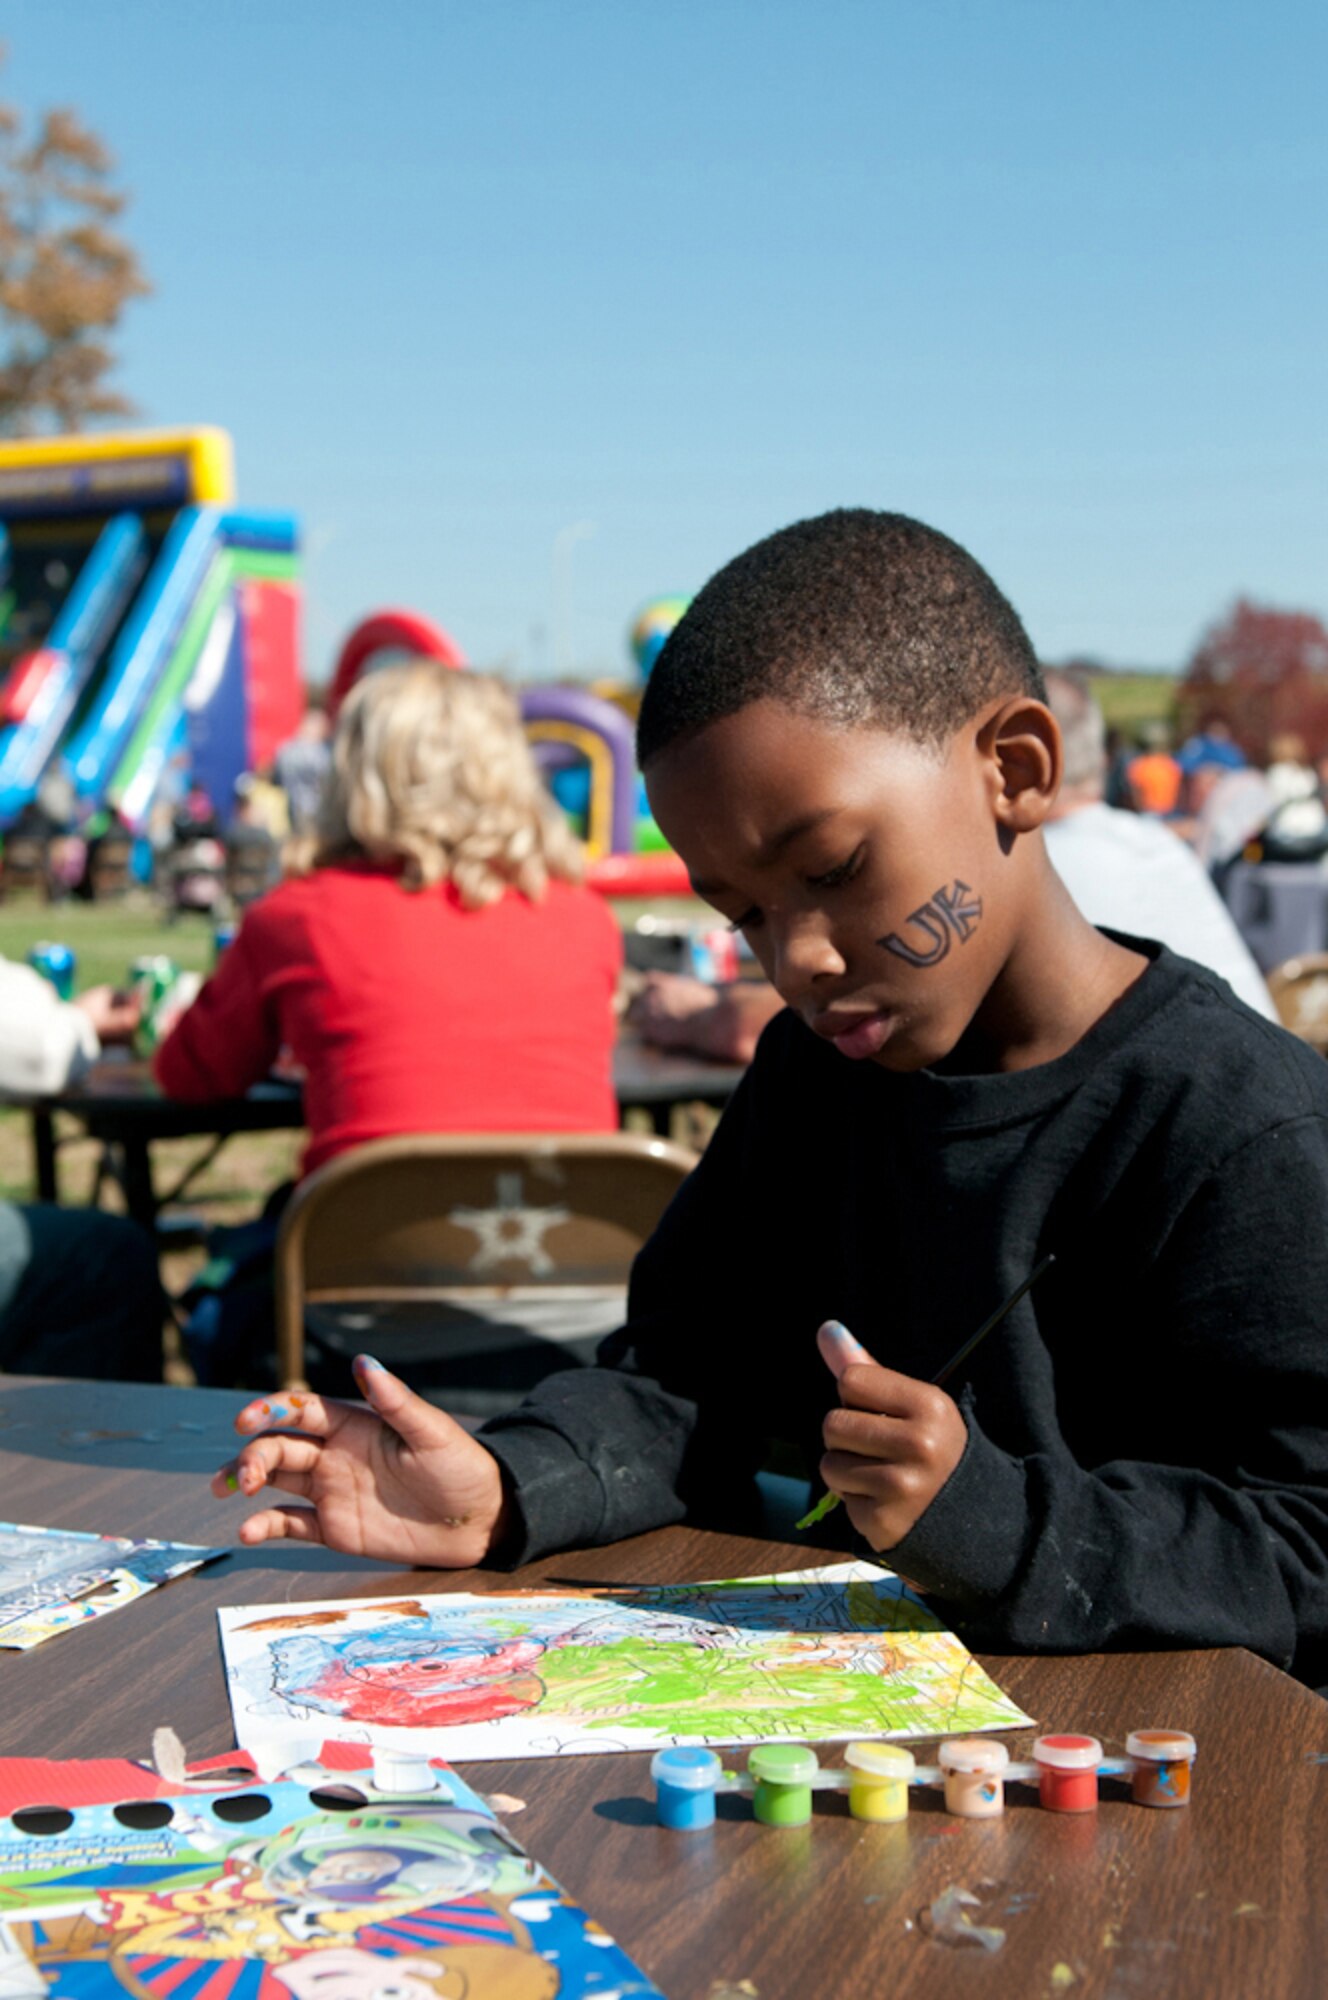 Adarius Hite, son of Kentucky Air National Guard member 2nd Lt. Angela Hite, paints pictures during Family Day at the 123rd Airlift Wing in Louisville, Ky., Oct. 21, 2012. One of the reasons the Airman and Family Readiness Program is being recognized is because of the multiple family activities it sponsors on base.  (Kentucky Air National Guard photo by Senior Airman Vicky Spesard)